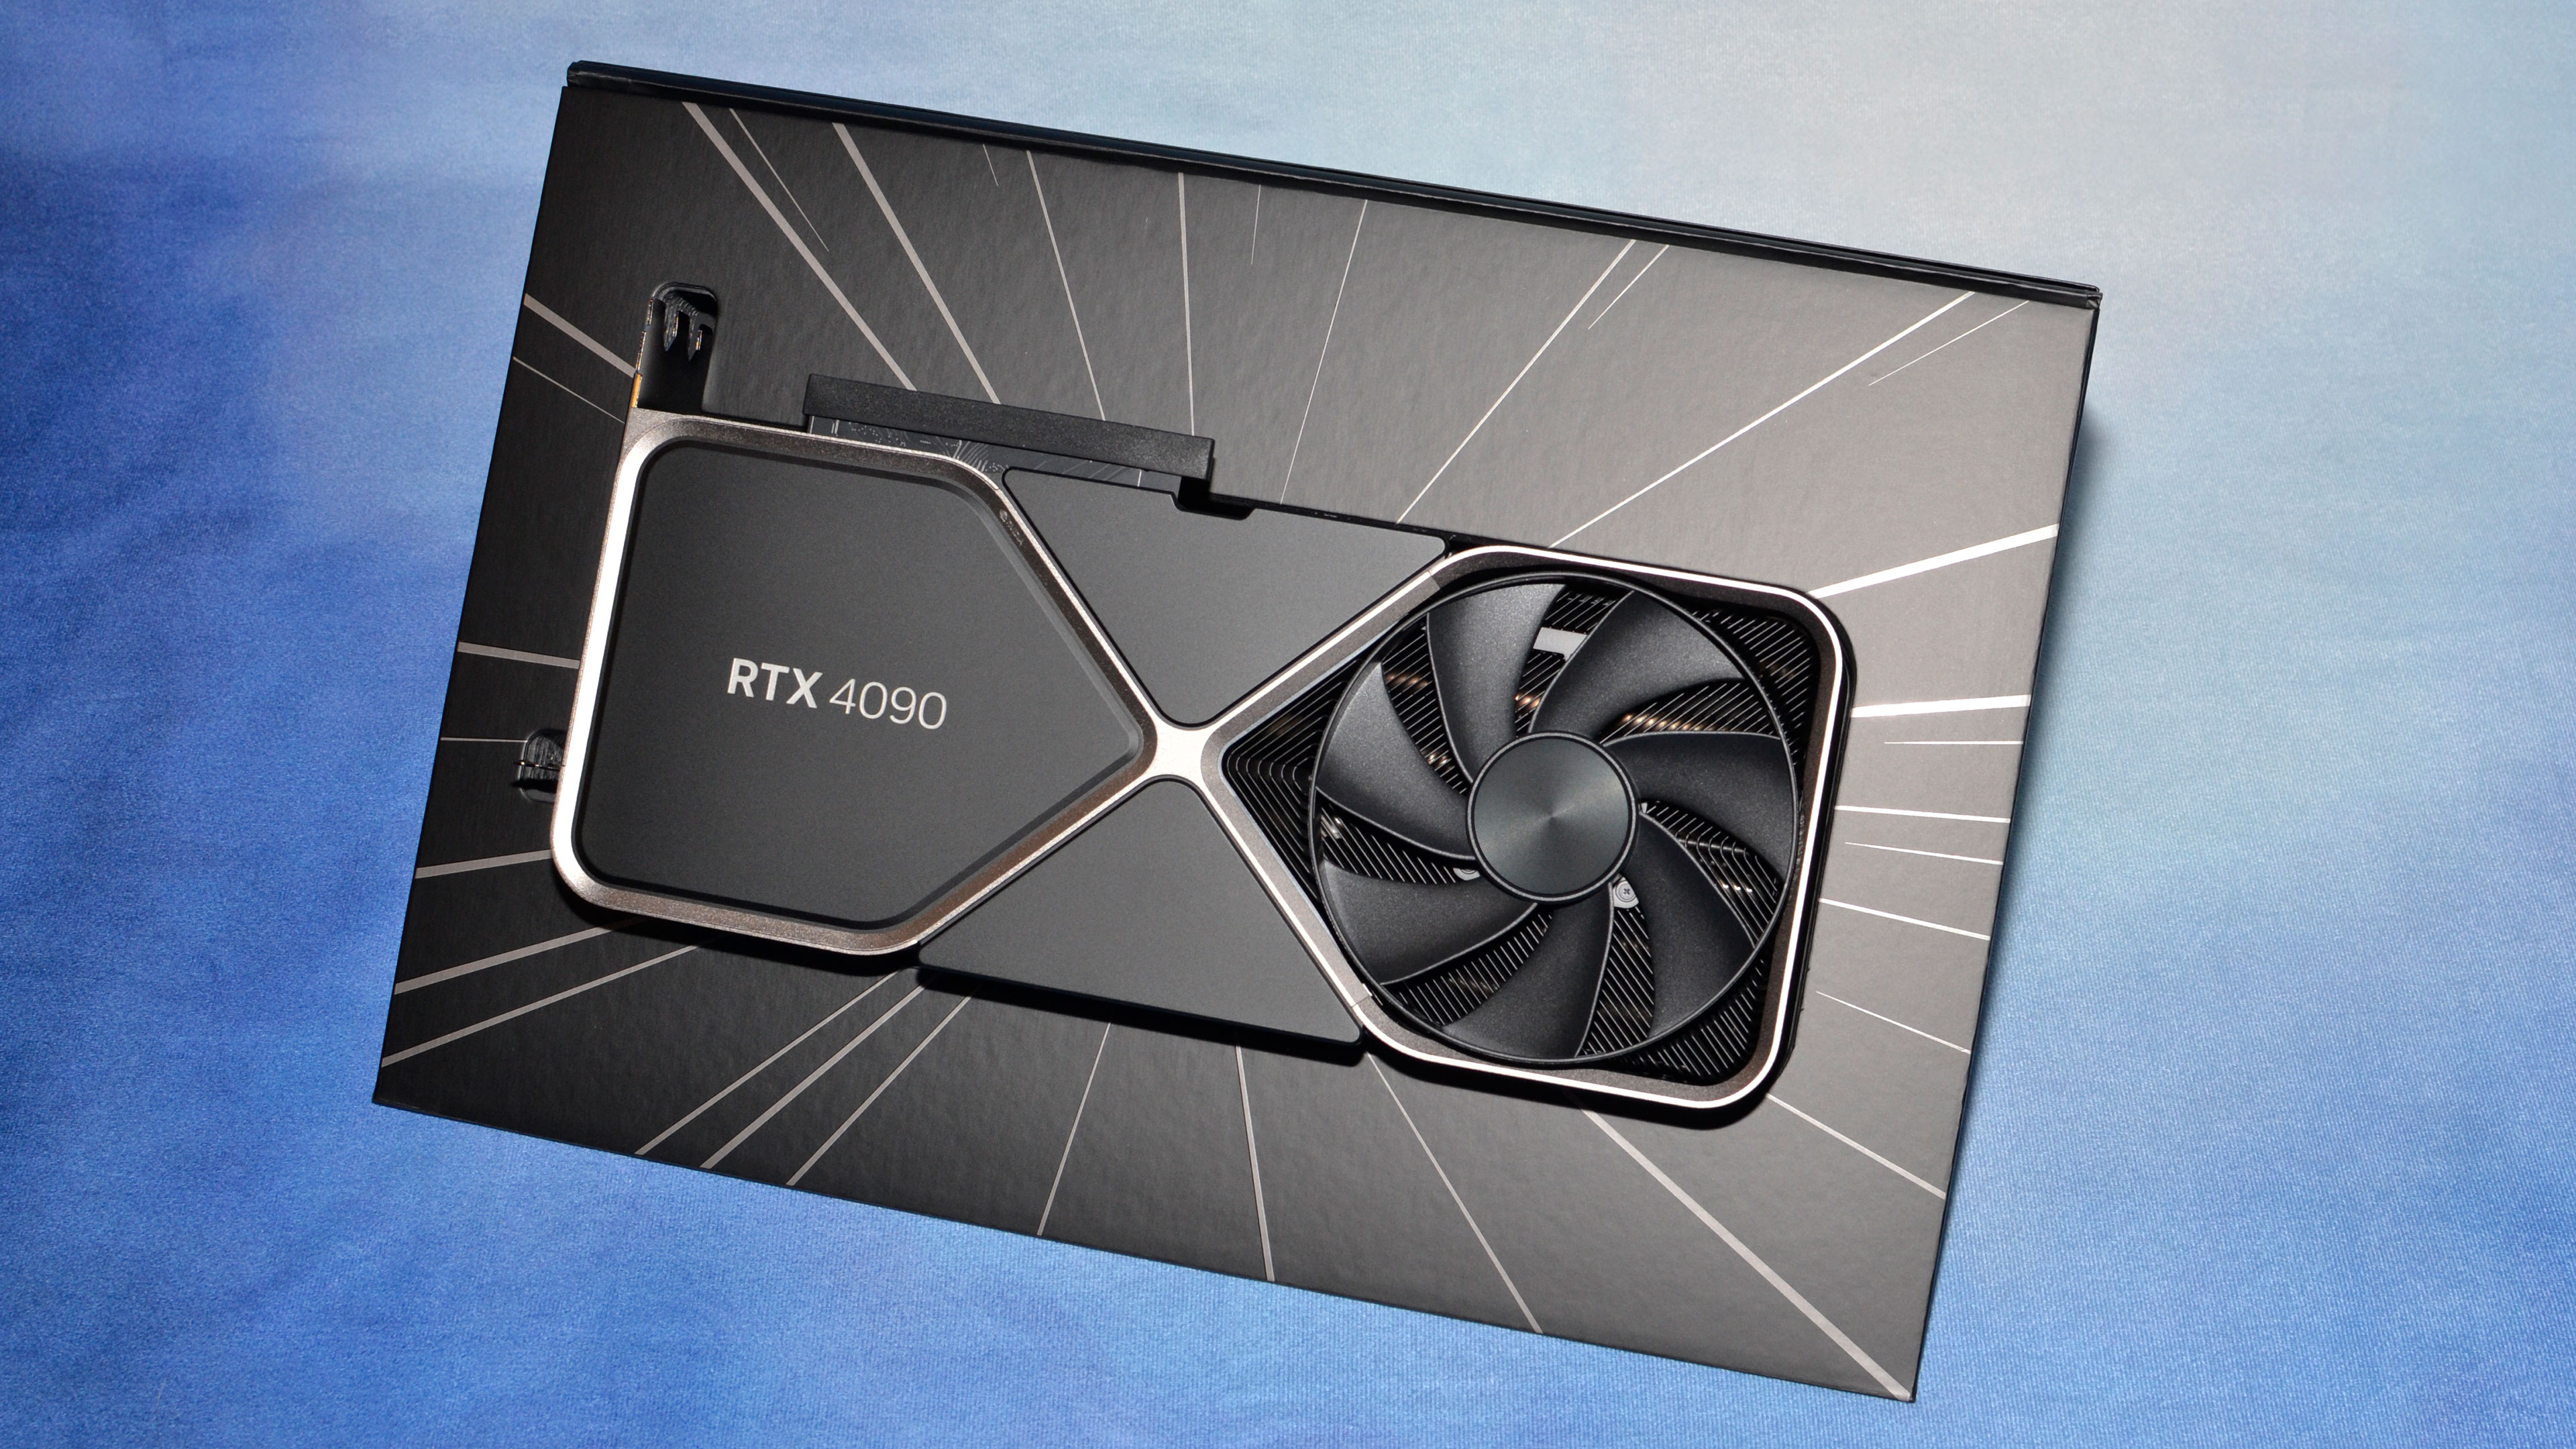 Nvidia GeForce RTX 3090 tested: 5 key things you need to know